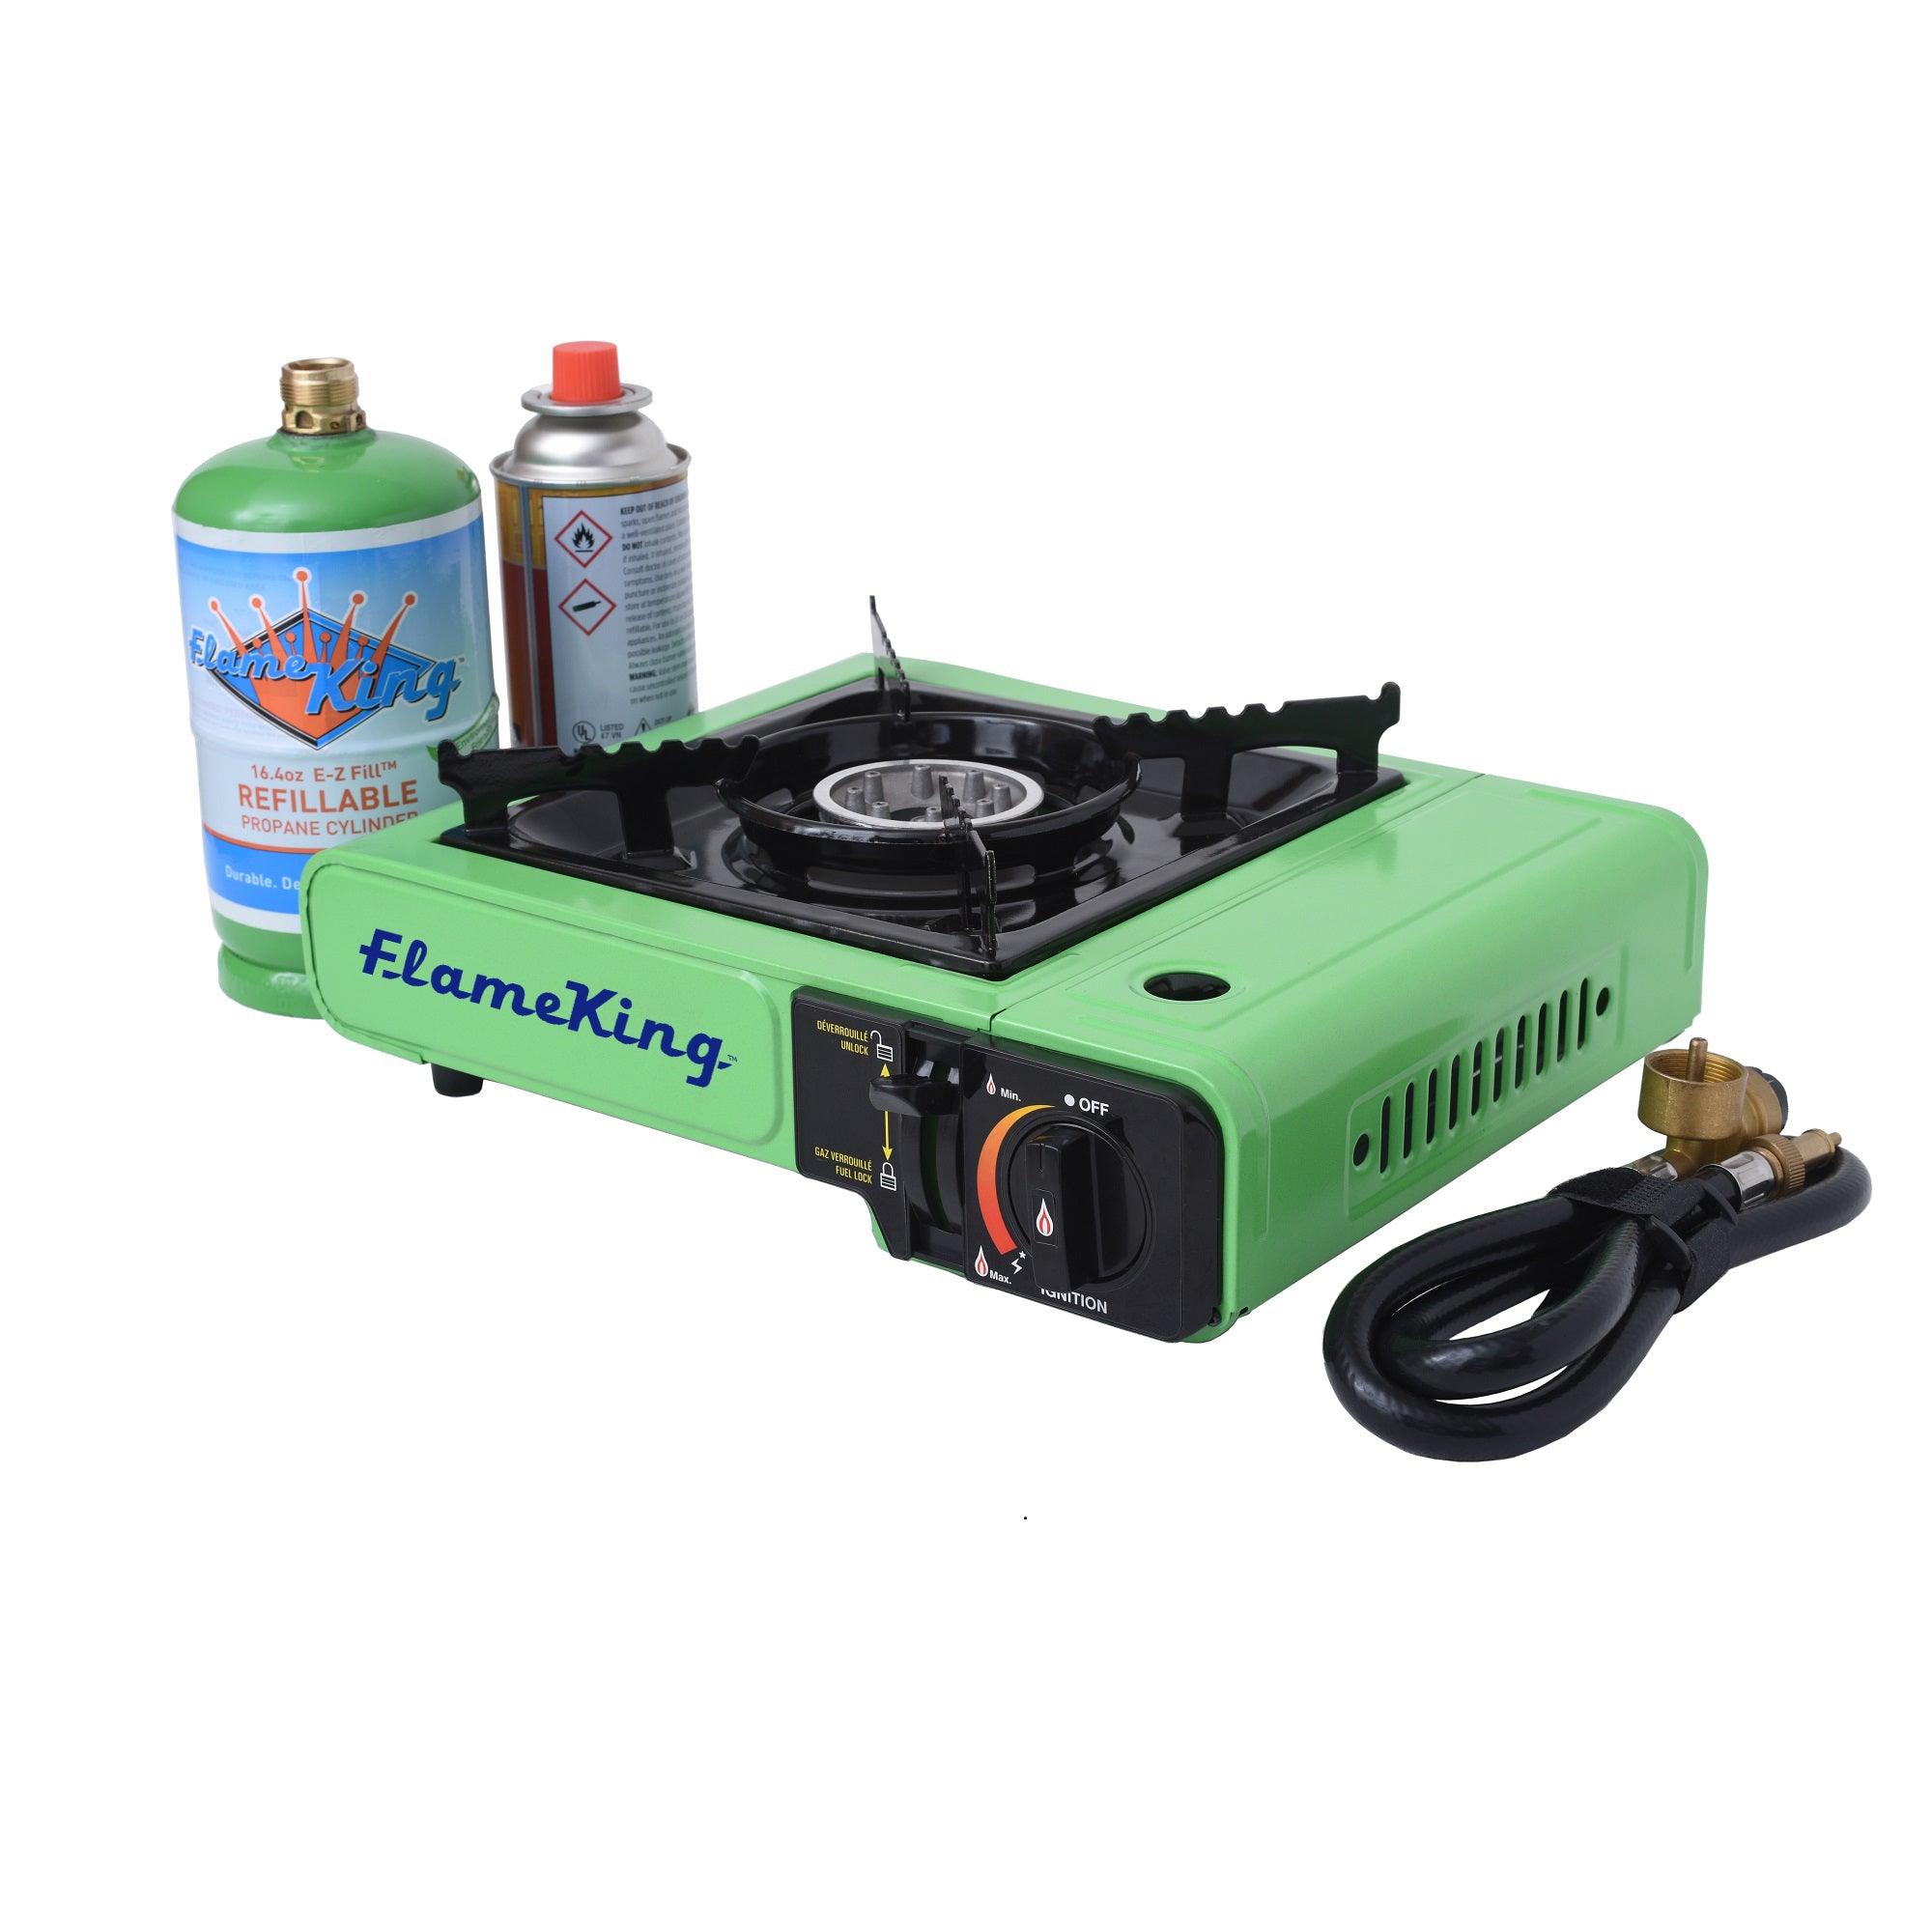 Reachable - Portable Gas Stove P650 Only Includes Stove